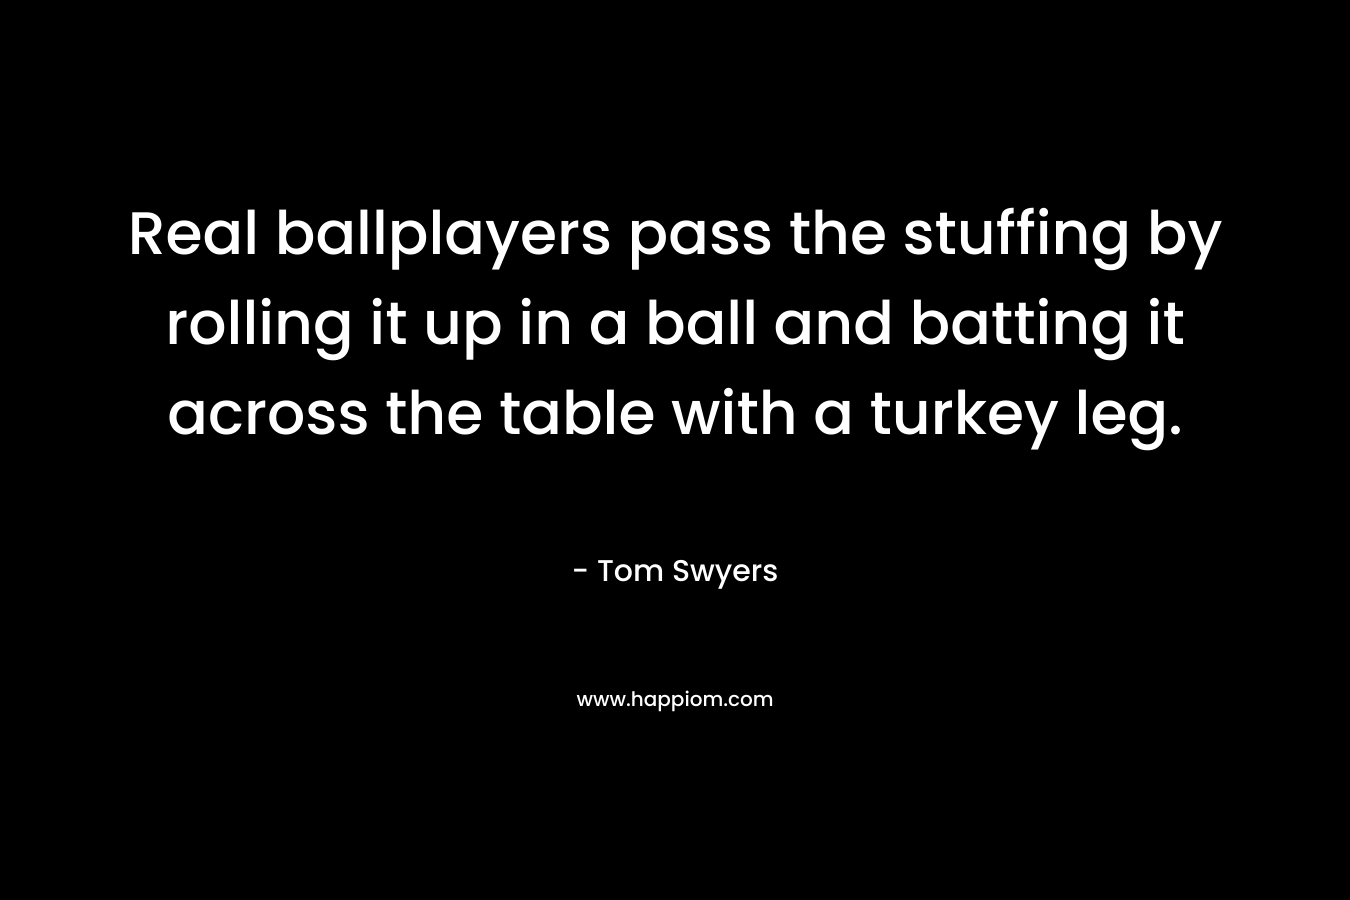 Real ballplayers pass the stuffing by rolling it up in a ball and batting it across the table with a turkey leg.